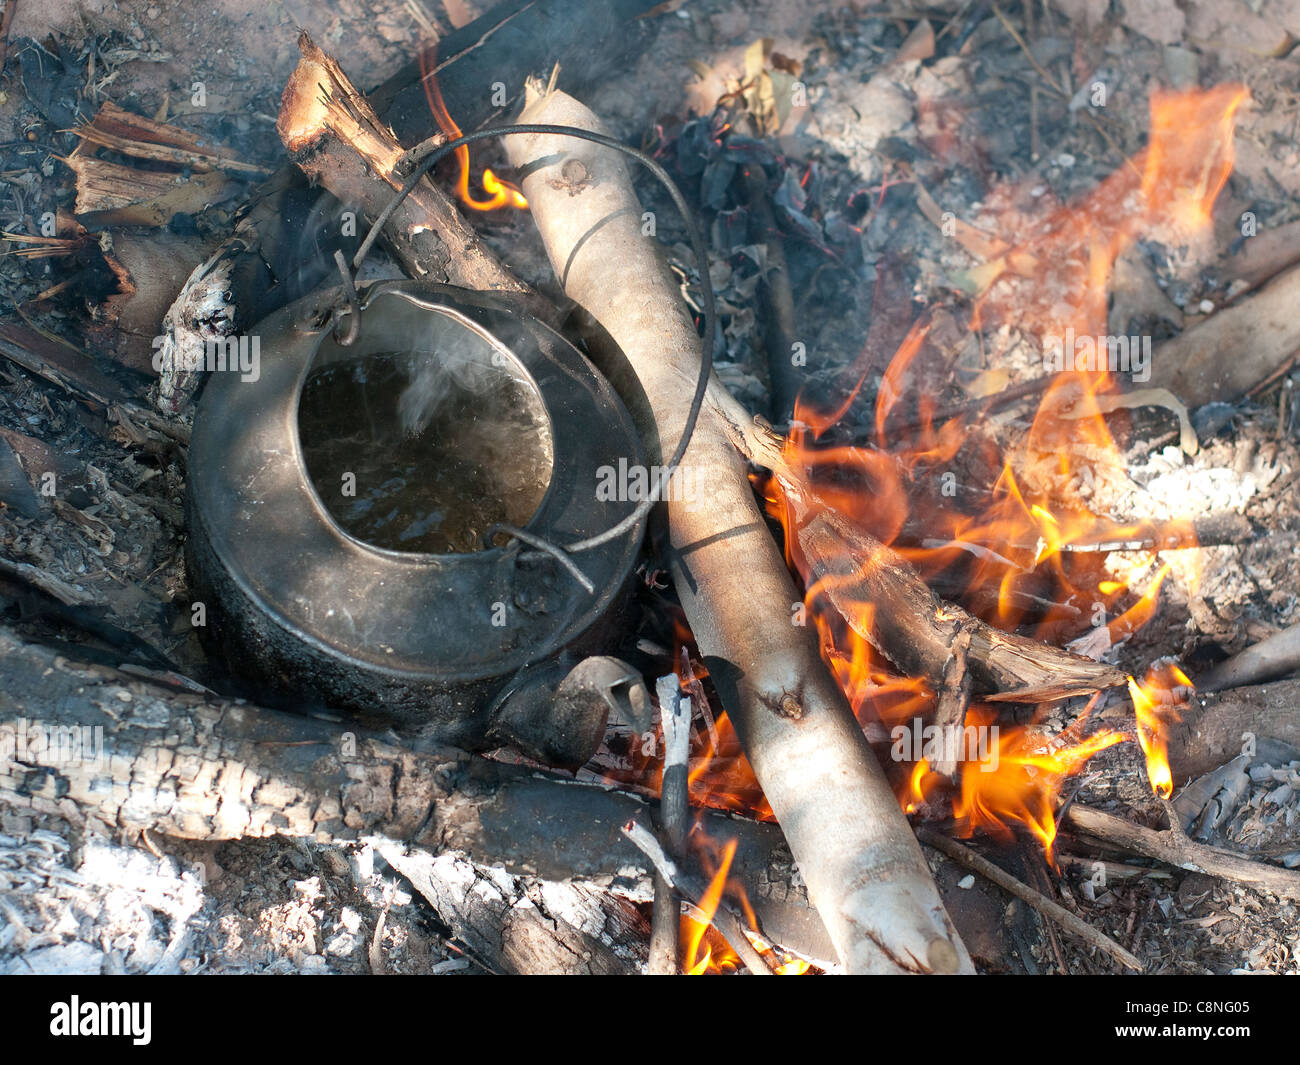 https://c8.alamy.com/comp/C8NG05/black-kettle-with-boiling-water-on-an-open-fire-in-a-forest-C8NG05.jpg